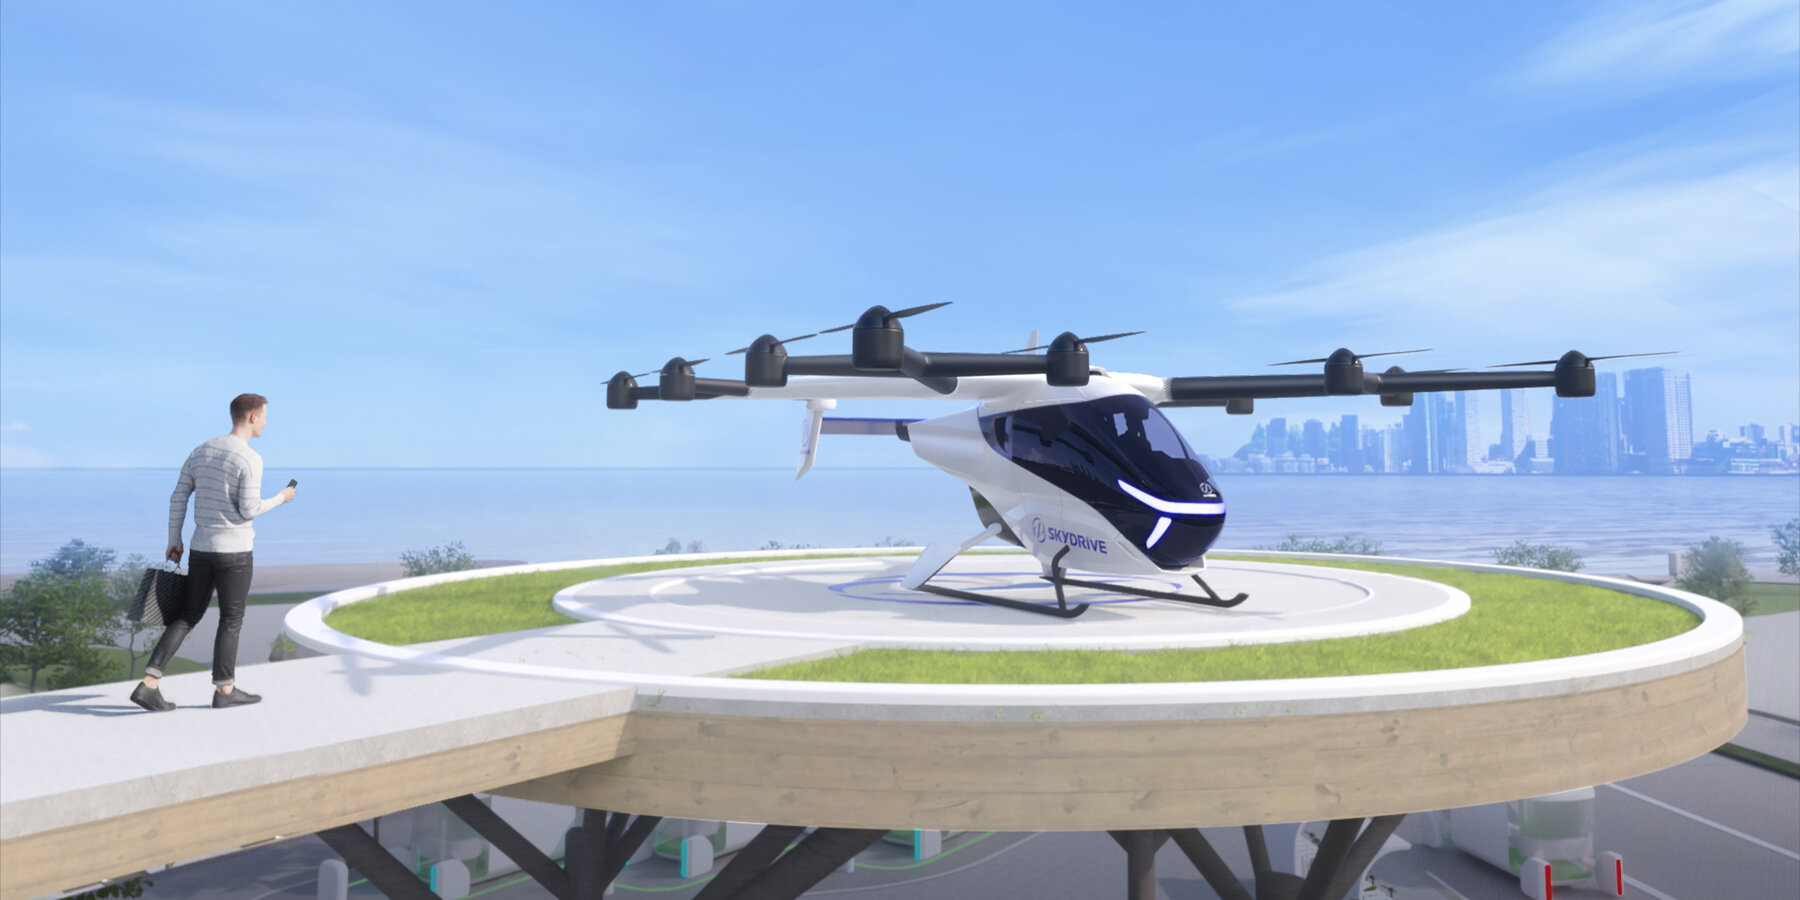 Mlit Big Xxx Videos - SkyDrive's SD-05 flying car unveiled for future air taxi in japan